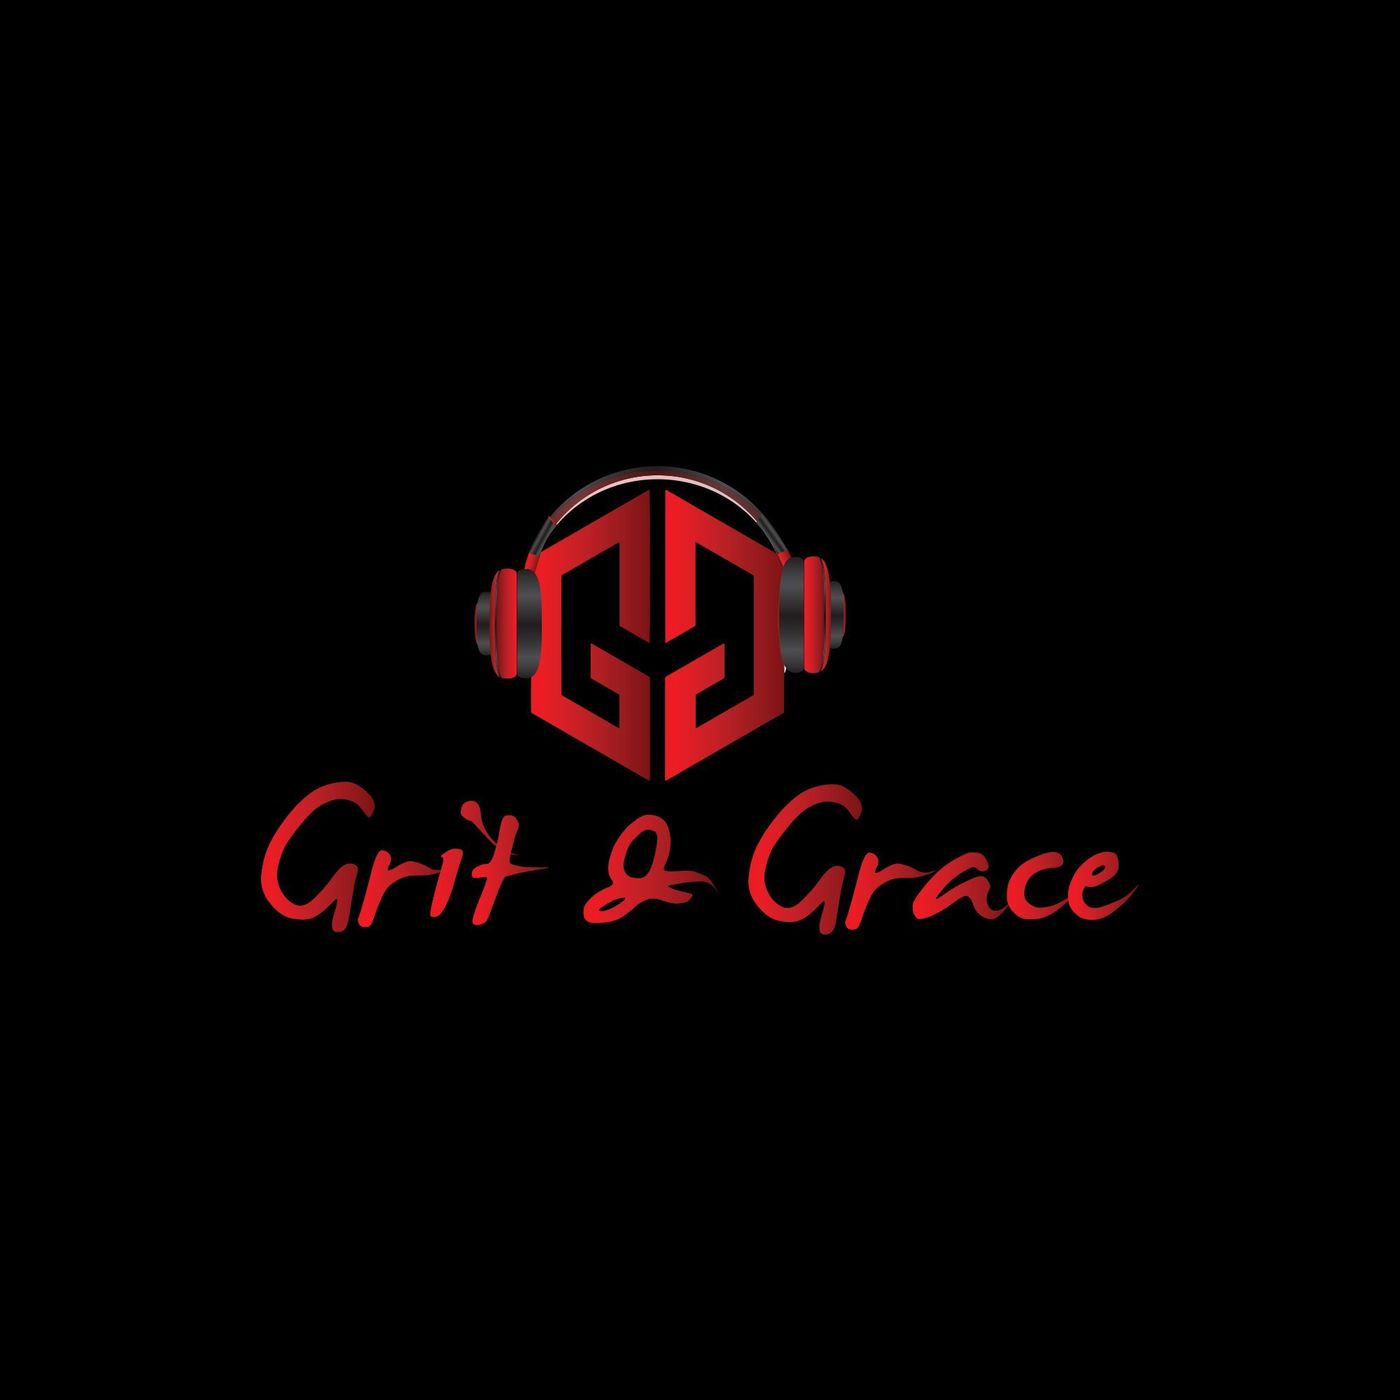 Grit and Grace: How to Find Your Divine Mission Image